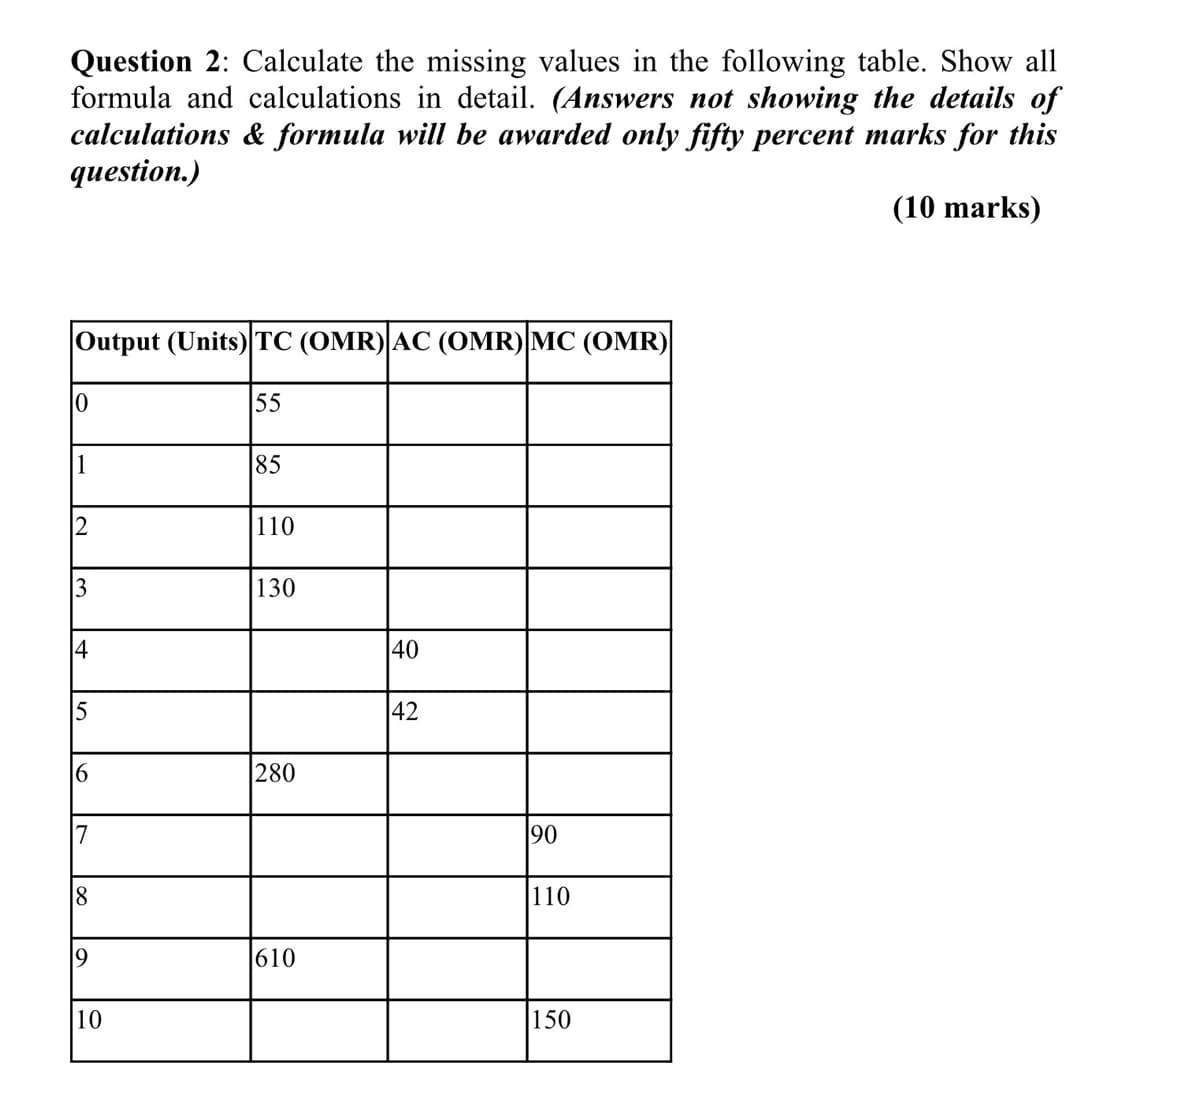 Question 2: Calculate the missing values in the following table. Show all
formula and calculations in detail. (Answers not showing the details of
calculations & formula will be awarded only fifty percent marks for this
question.)
(10 marks)
Output (Units) TC (OMR)AC (OMR) MC (OMR)
55
1
85
110
3
130
4
40
15
|42
280
17
90
8
110
19
610
10
150
